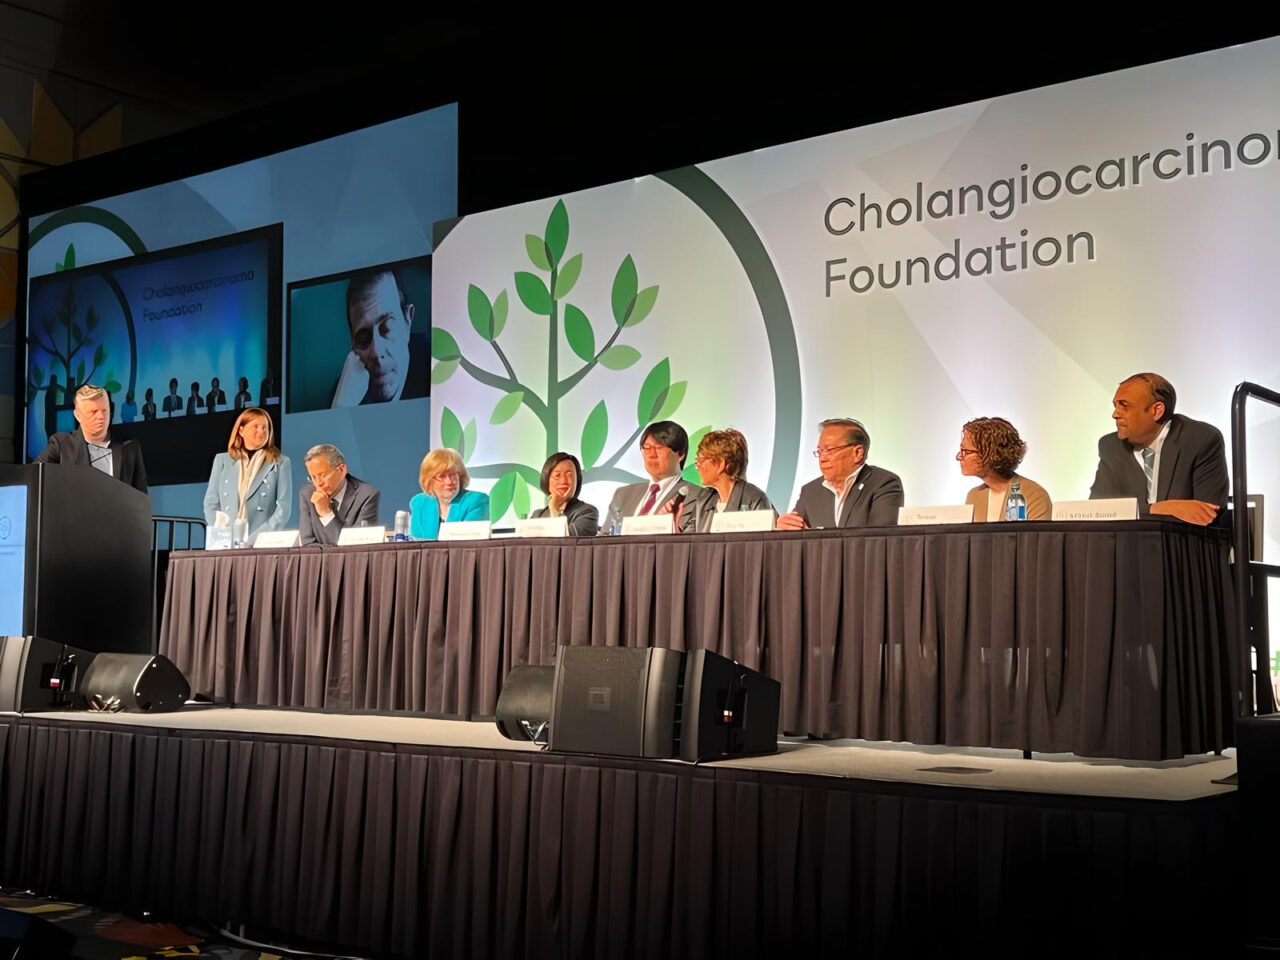 Stacie Lindsey: At the historic Round-table Discussion and Regulator Roundtable at the Cholangiocarcinoma Foundation 11th Annual Conference